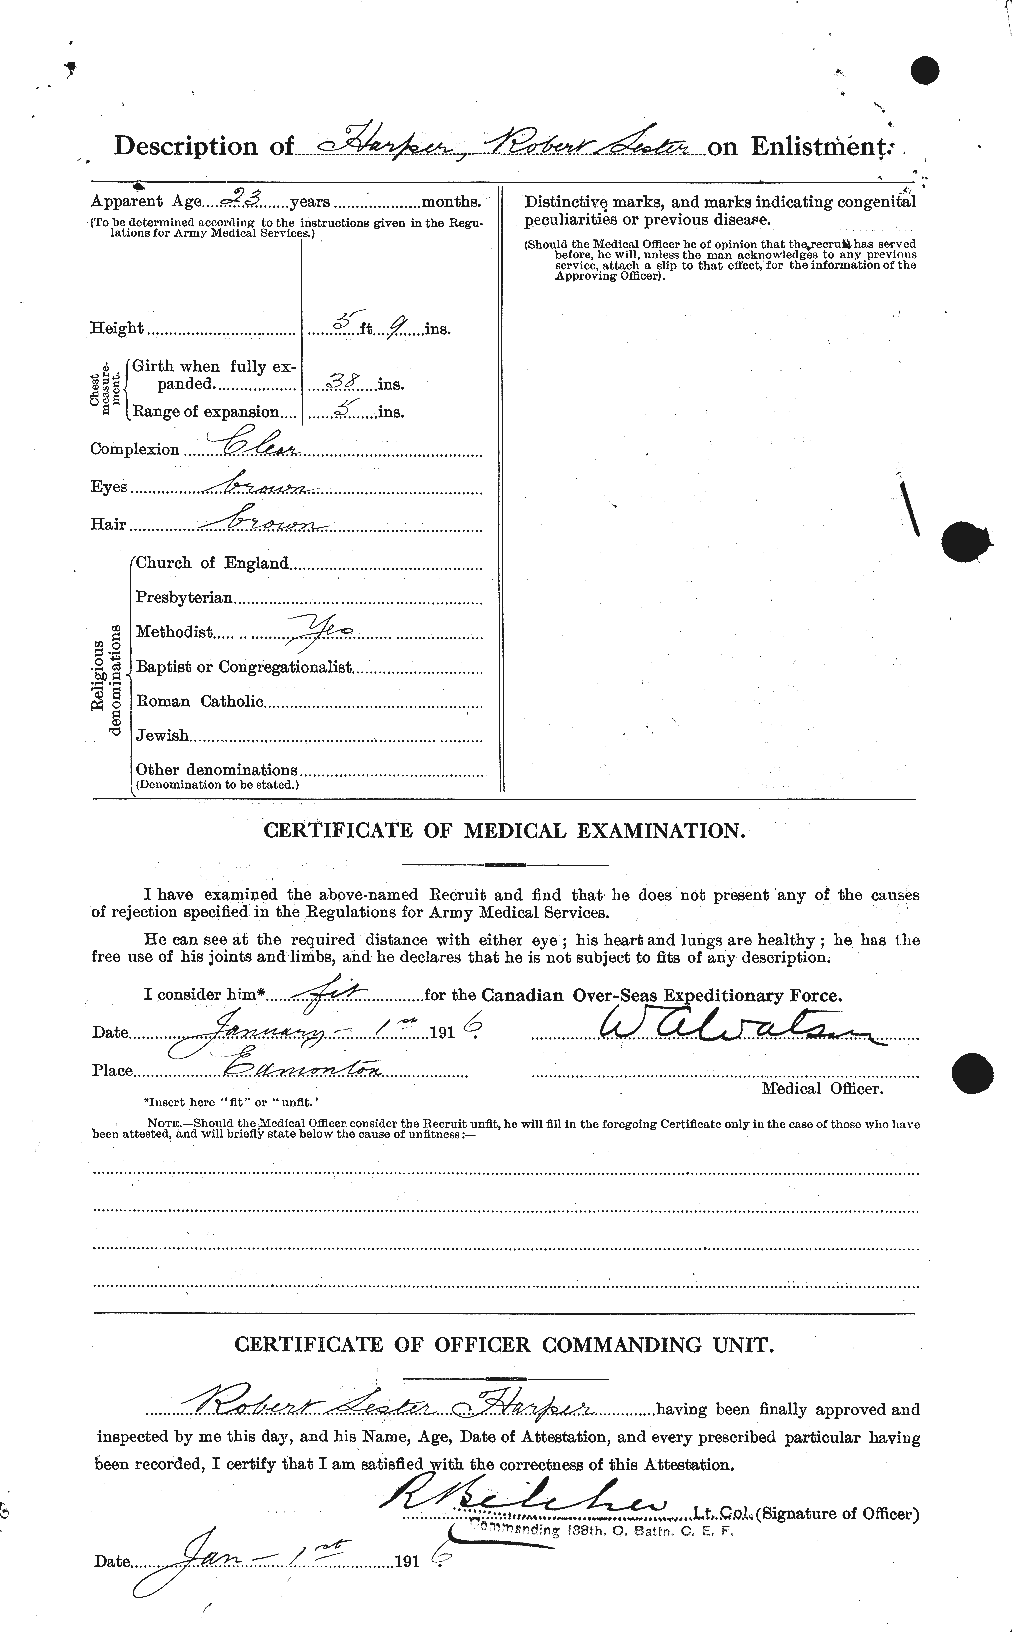 Personnel Records of the First World War - CEF 375439b